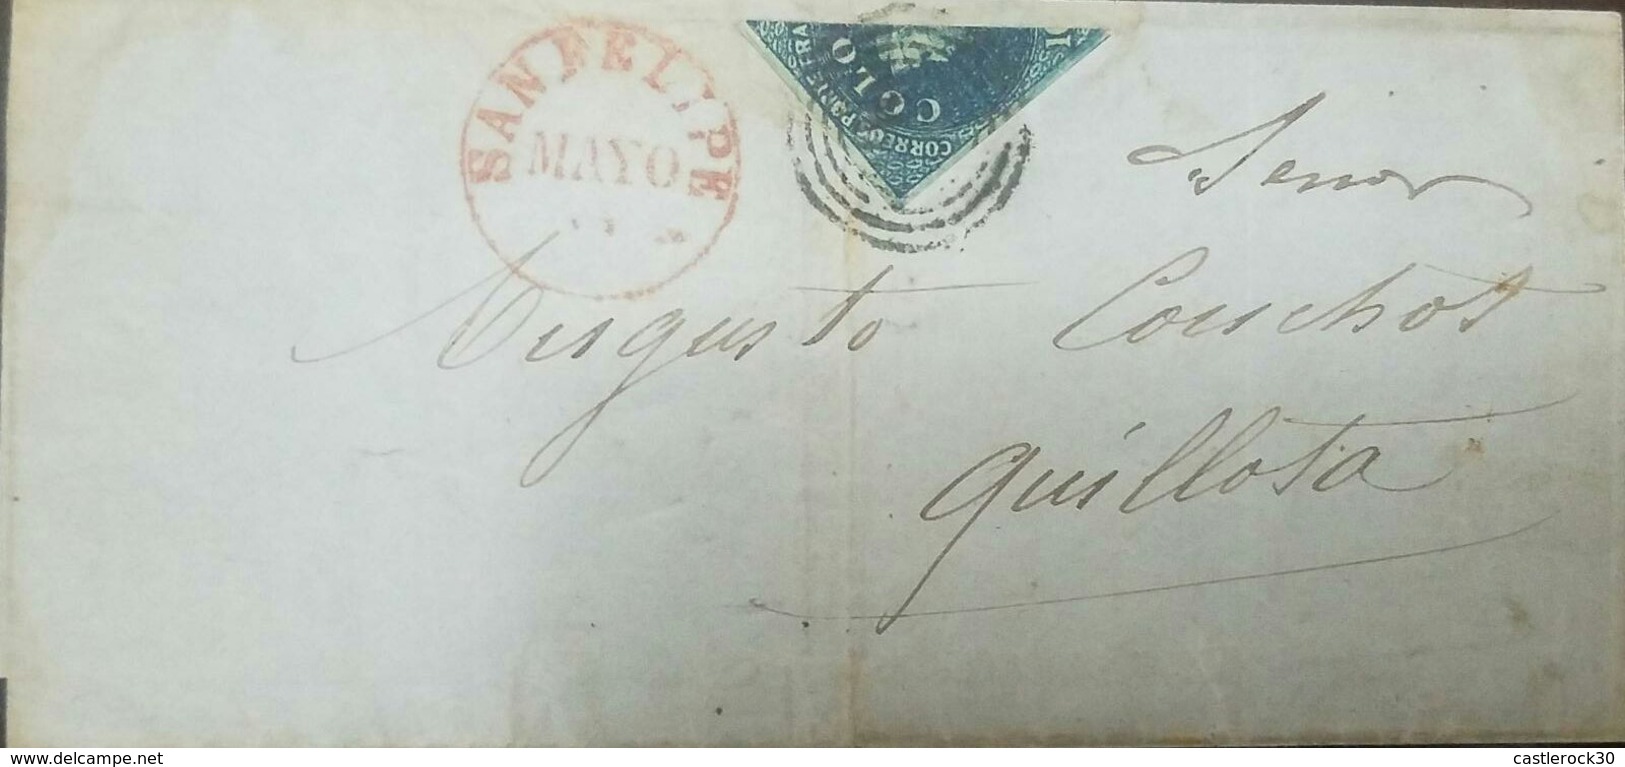 O) 1859 CHILE, CHRISTOPHER COLUMBUS BISECT - CORREOS PORTE FRANCO GREEN, FROM SAN FELIPE TO GUILLOTA, XF - Chile